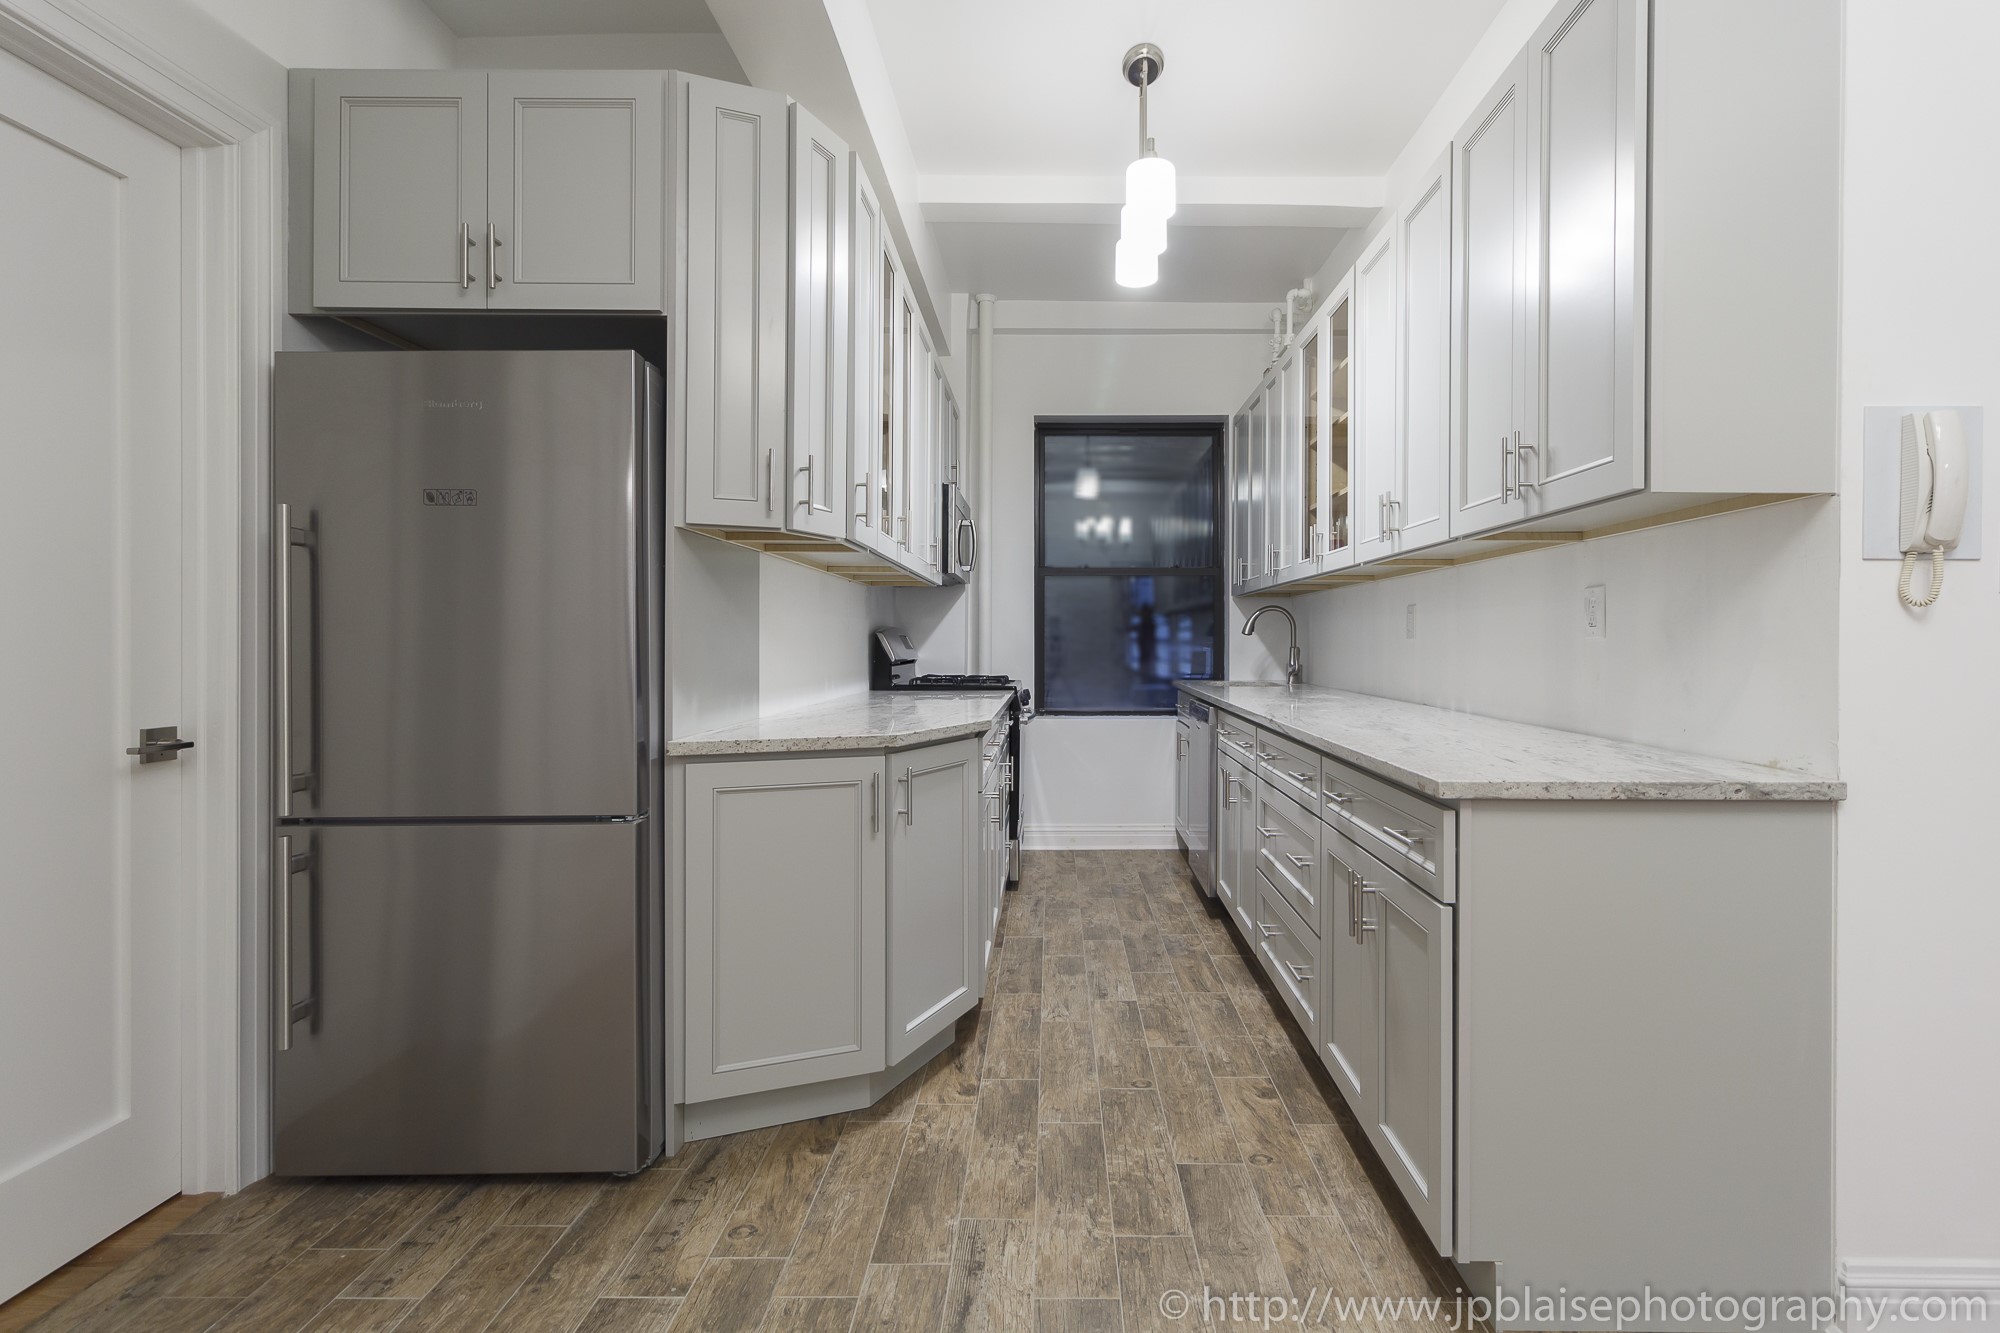 Apartment photographer upper west side ny ny manhattan new york kitchen real estate